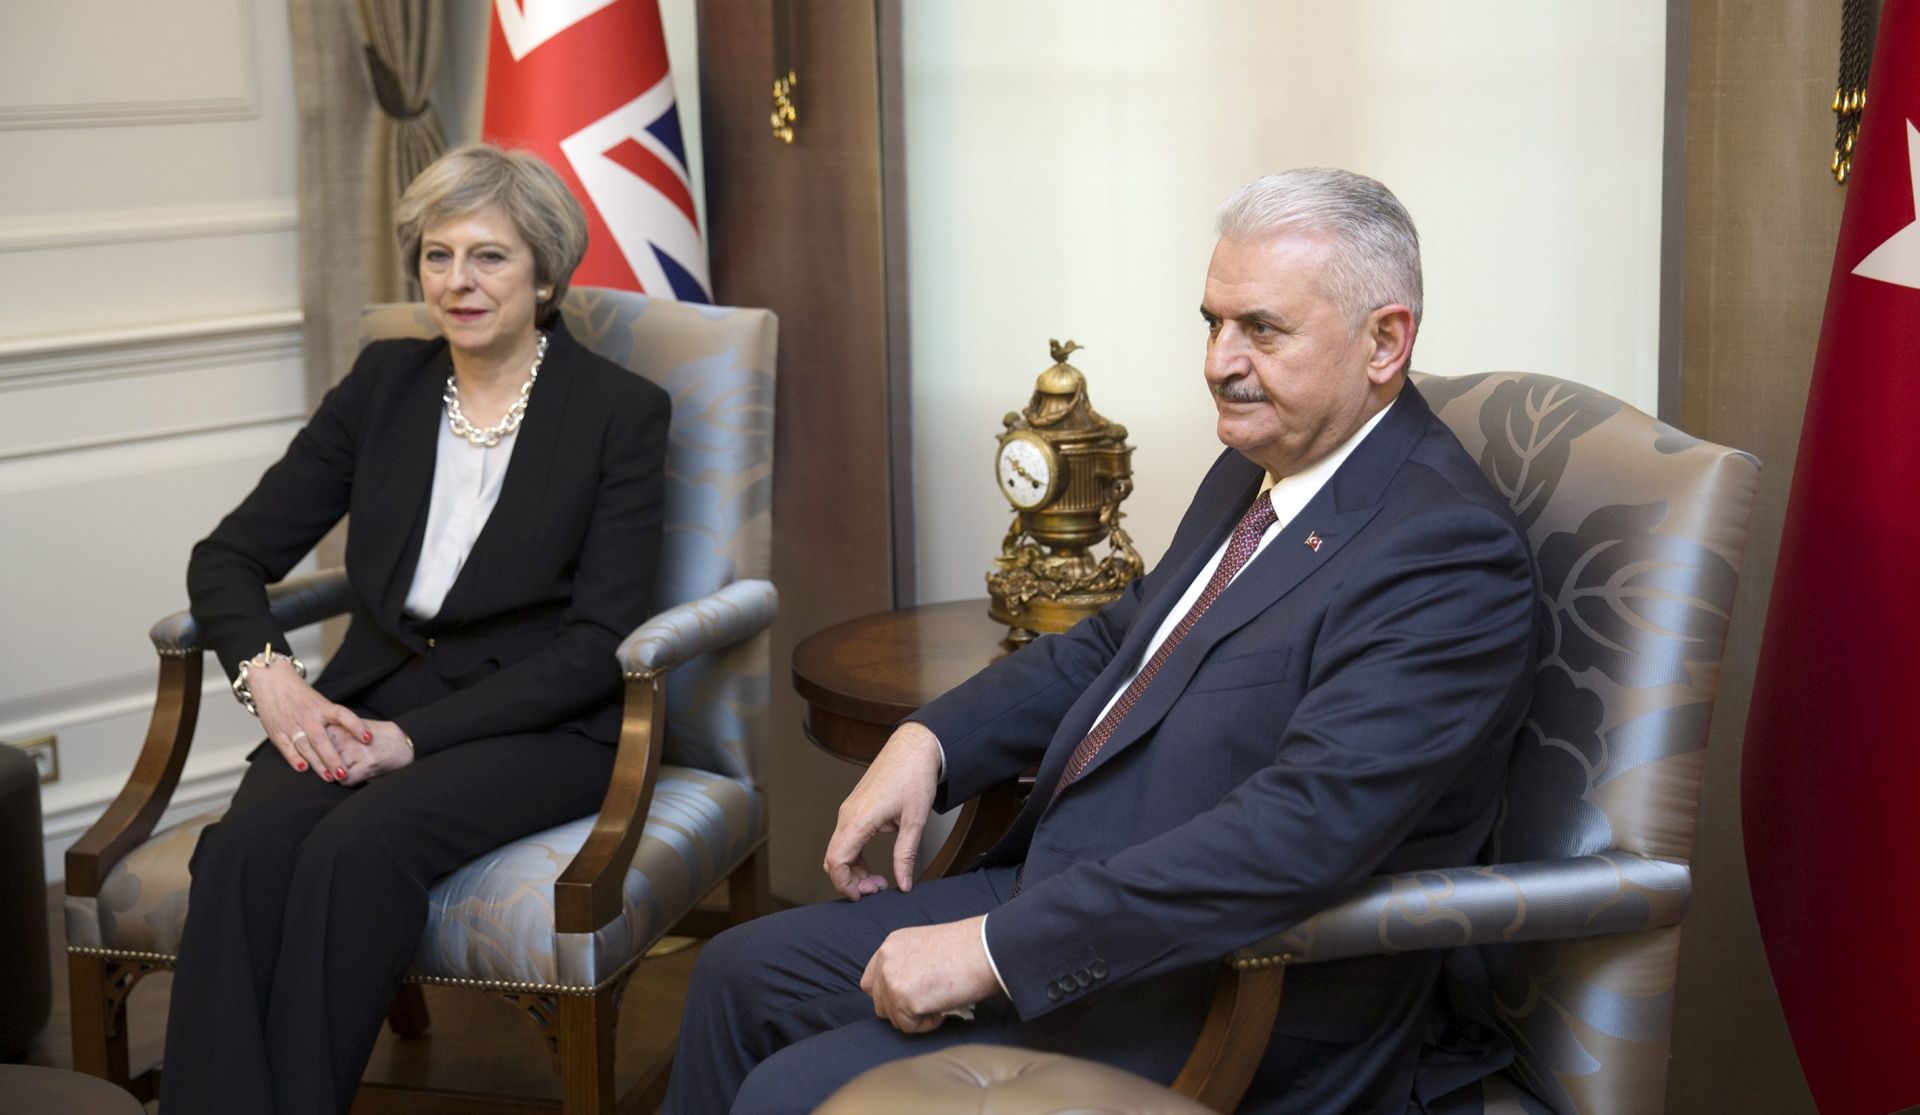 epa05757088 A handout photo made available by Turkish Prime Minister Press office shows British Prime Minister Theresa May (L) meeting with Turkish Prime Minister Binali Yildirim (R) in Ankara, Turkey, 28 January 2017. The British Prime Minister met on 28 January with Turkish leaders to discuss trade issues, the fight against Jihadism and Cyprus' reunification process.  EPA/TURKISH PRIME MINISTER PRESS OFFICE HANDOUT  HANDOUT EDITORIAL USE ONLY/NO SALES